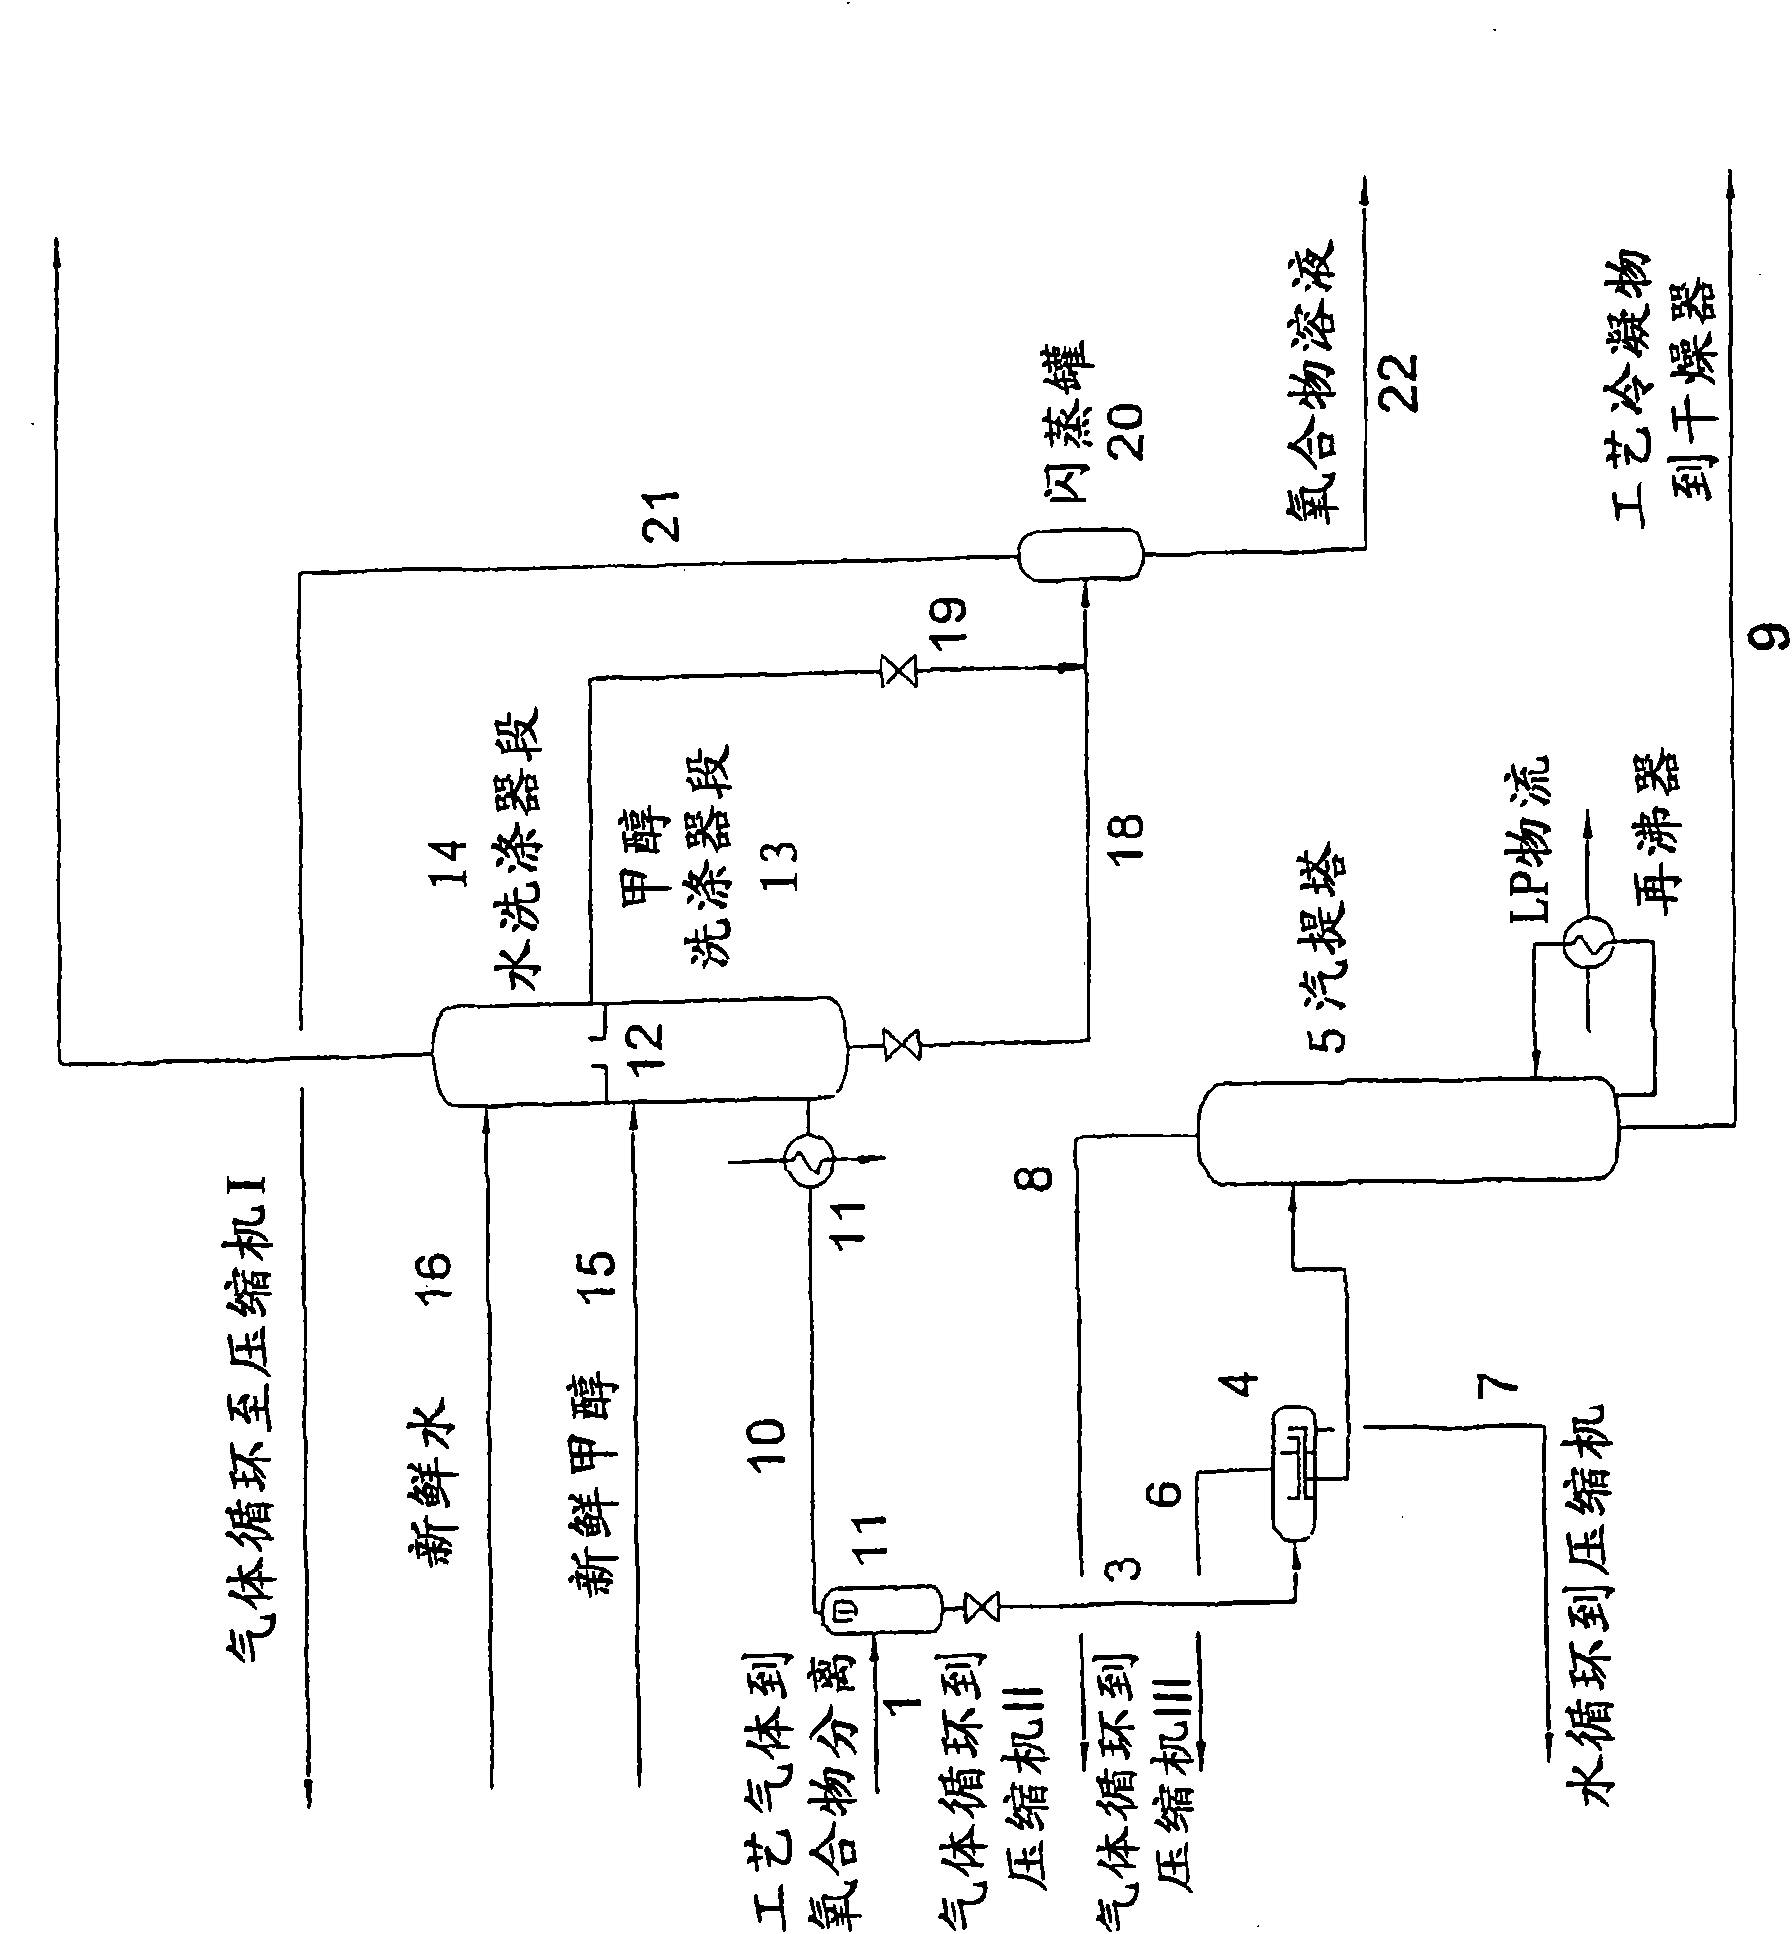 Method for processing an olefin-containing product stream